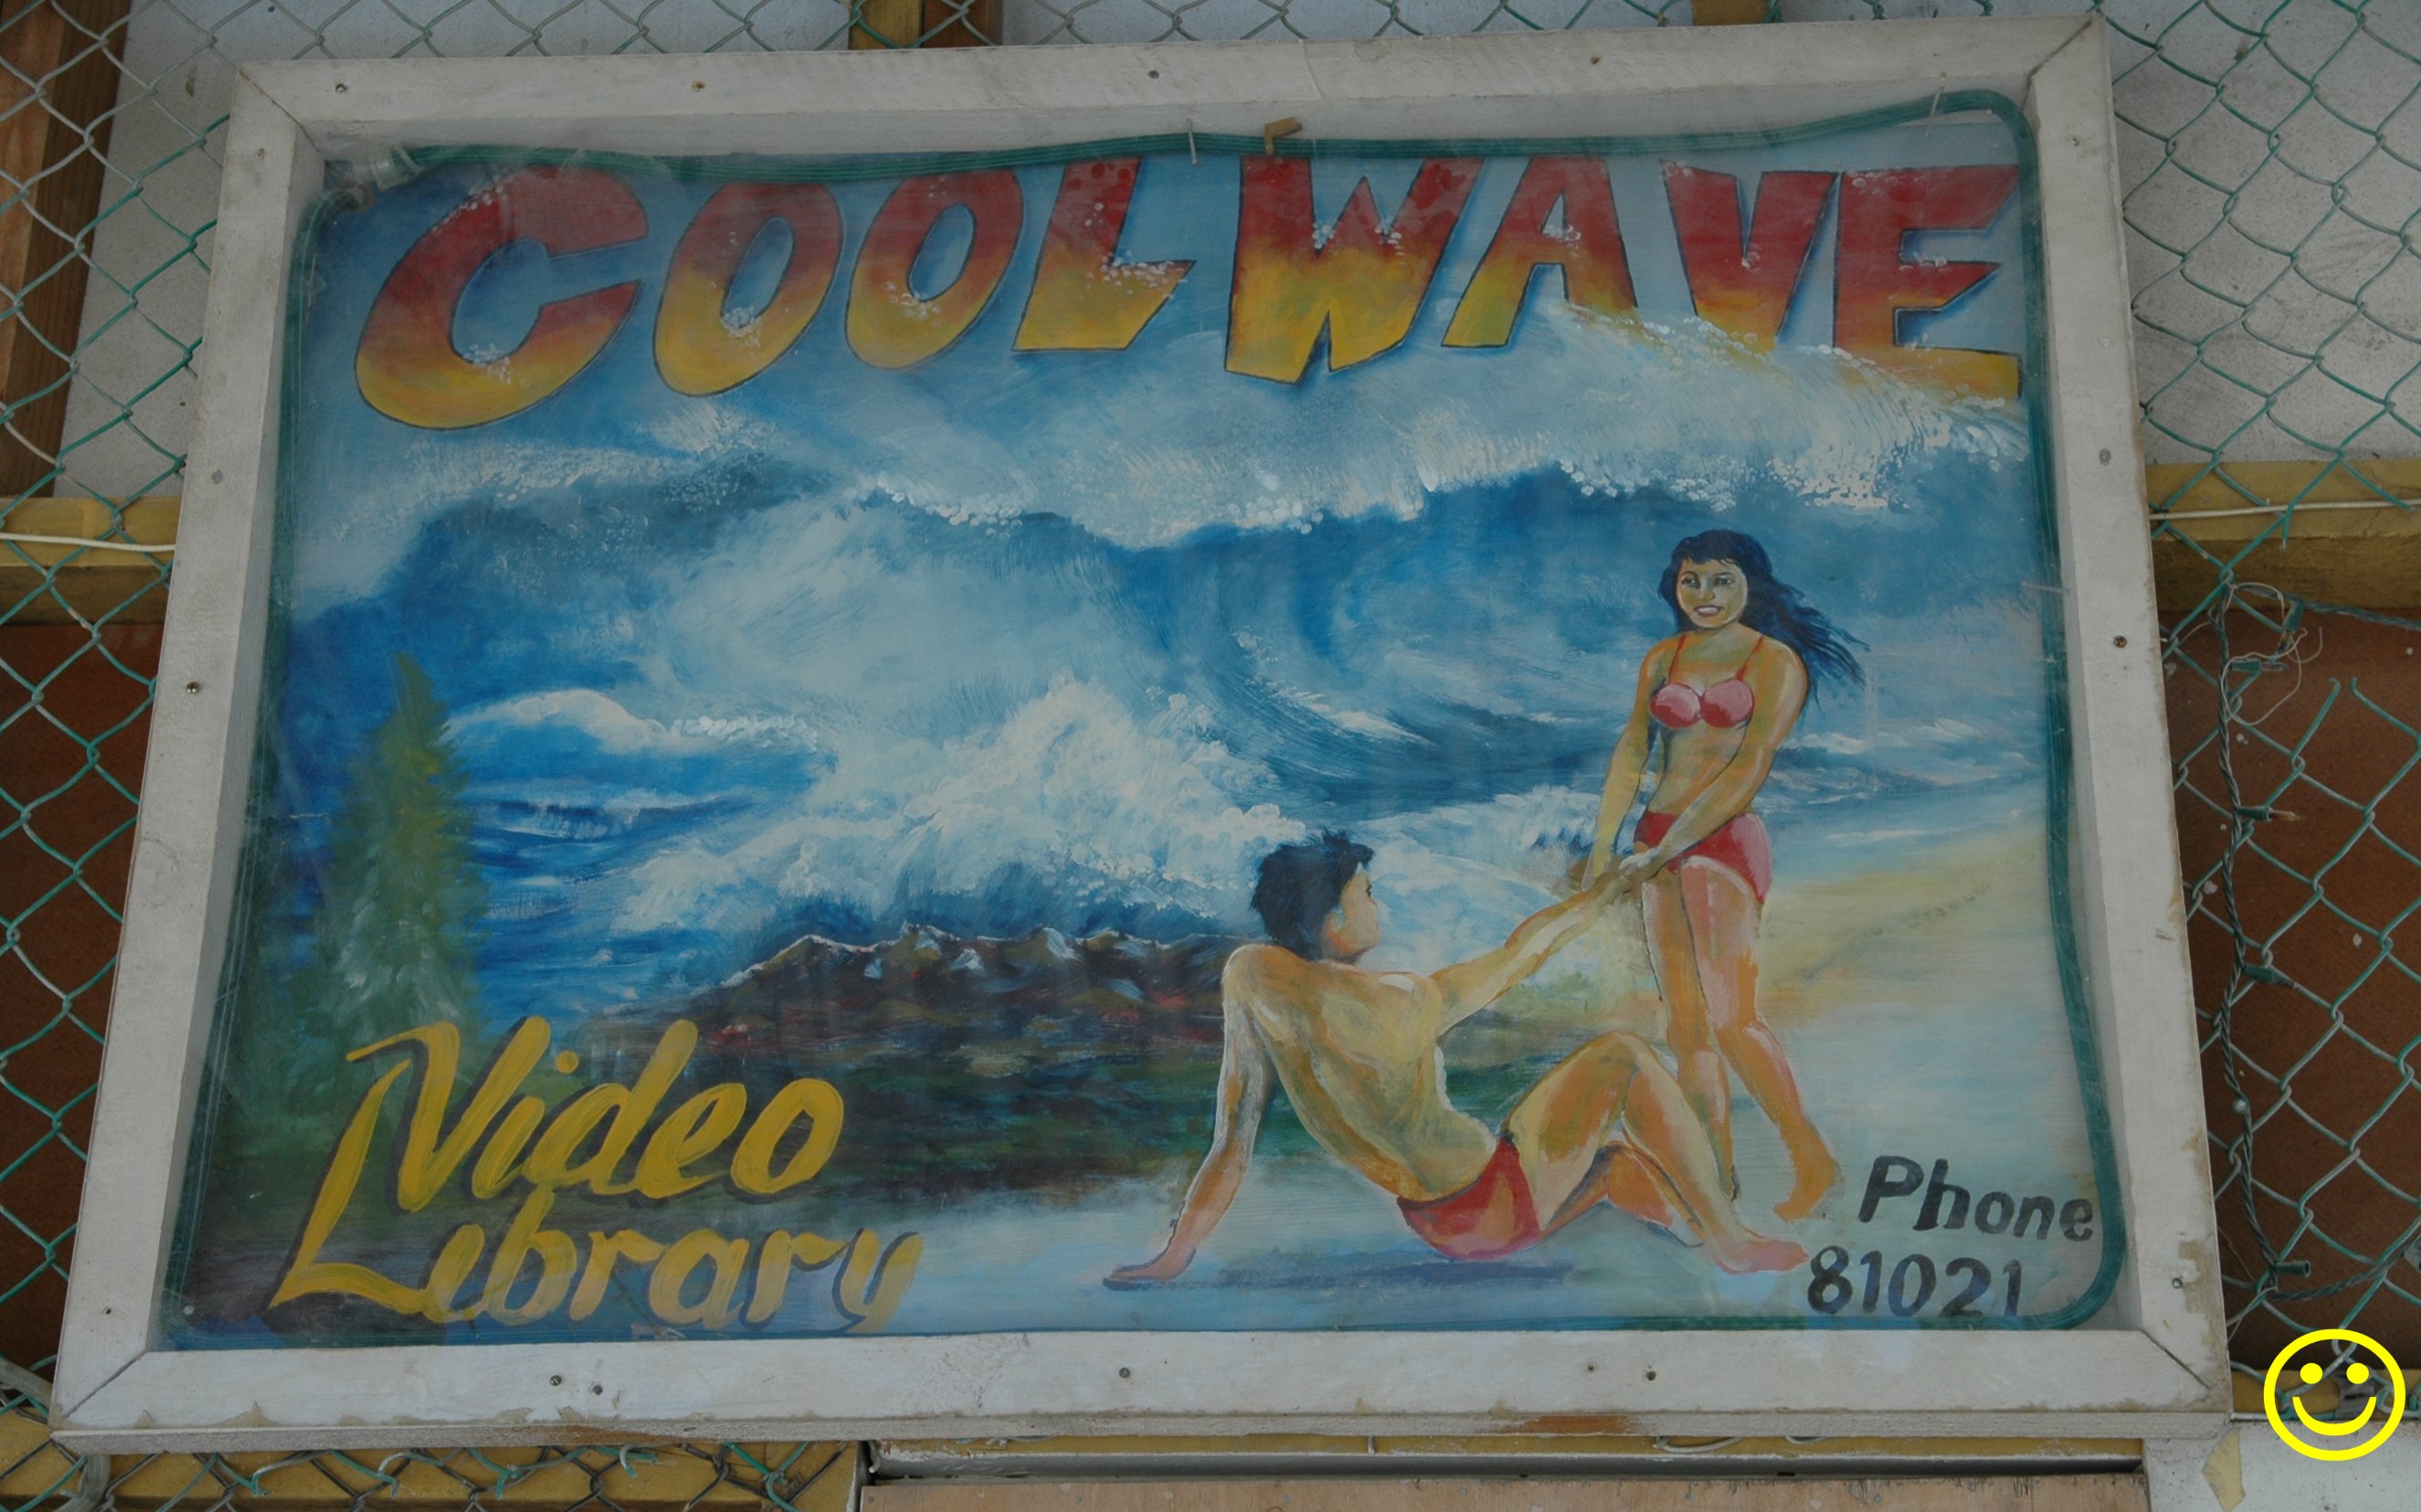 Cool wave video library